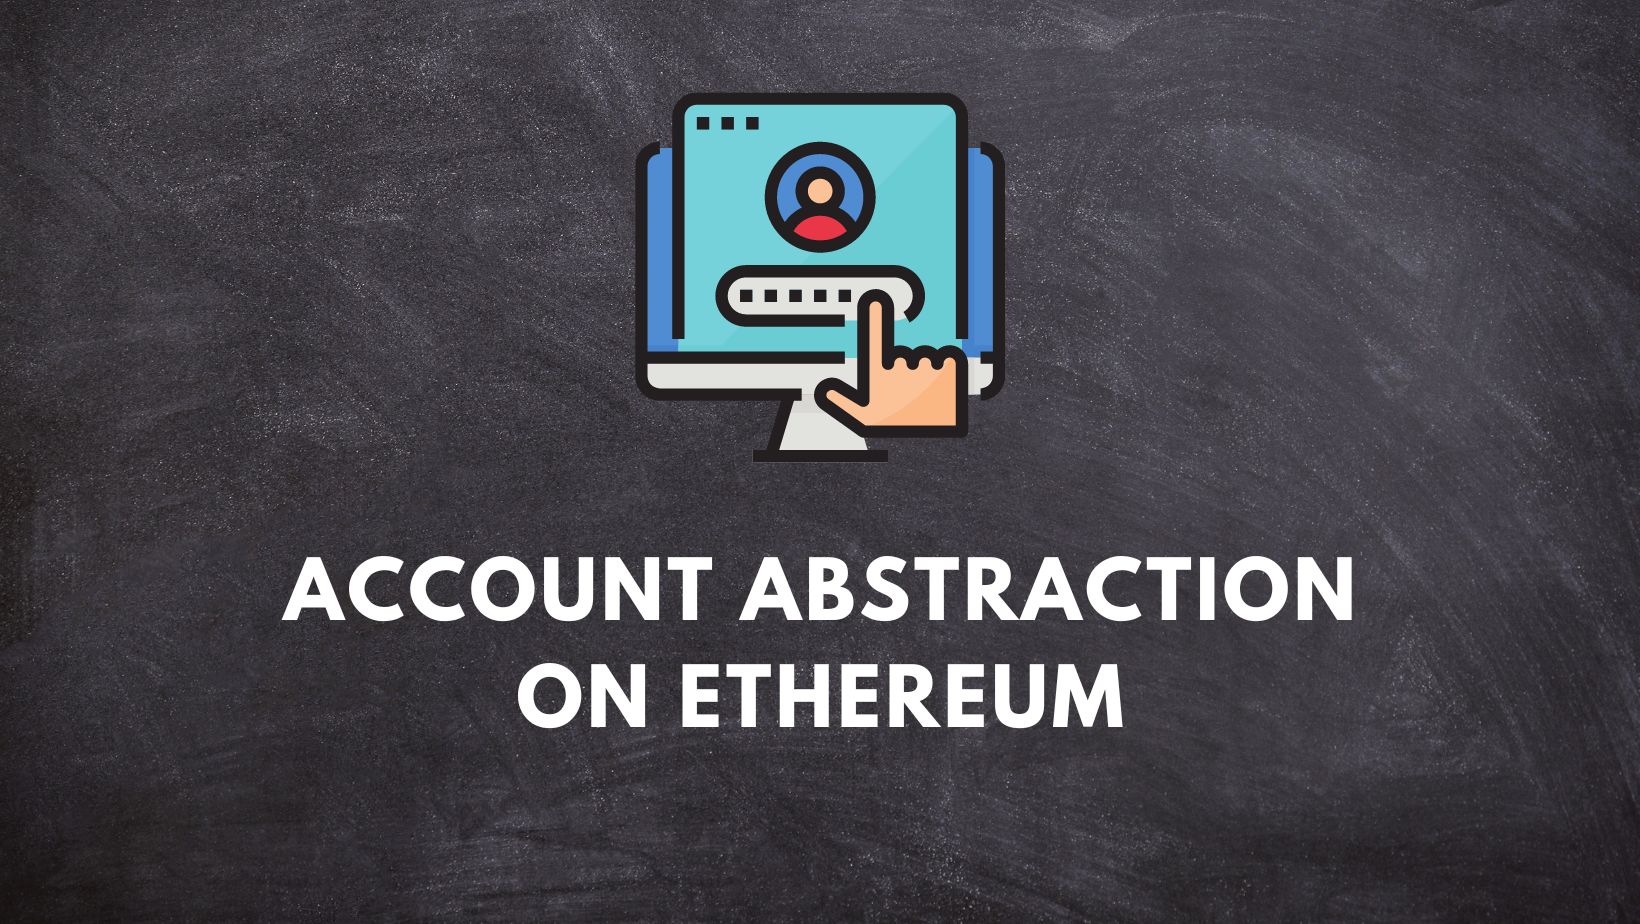 Account abstraction on Ethereum: An introduction